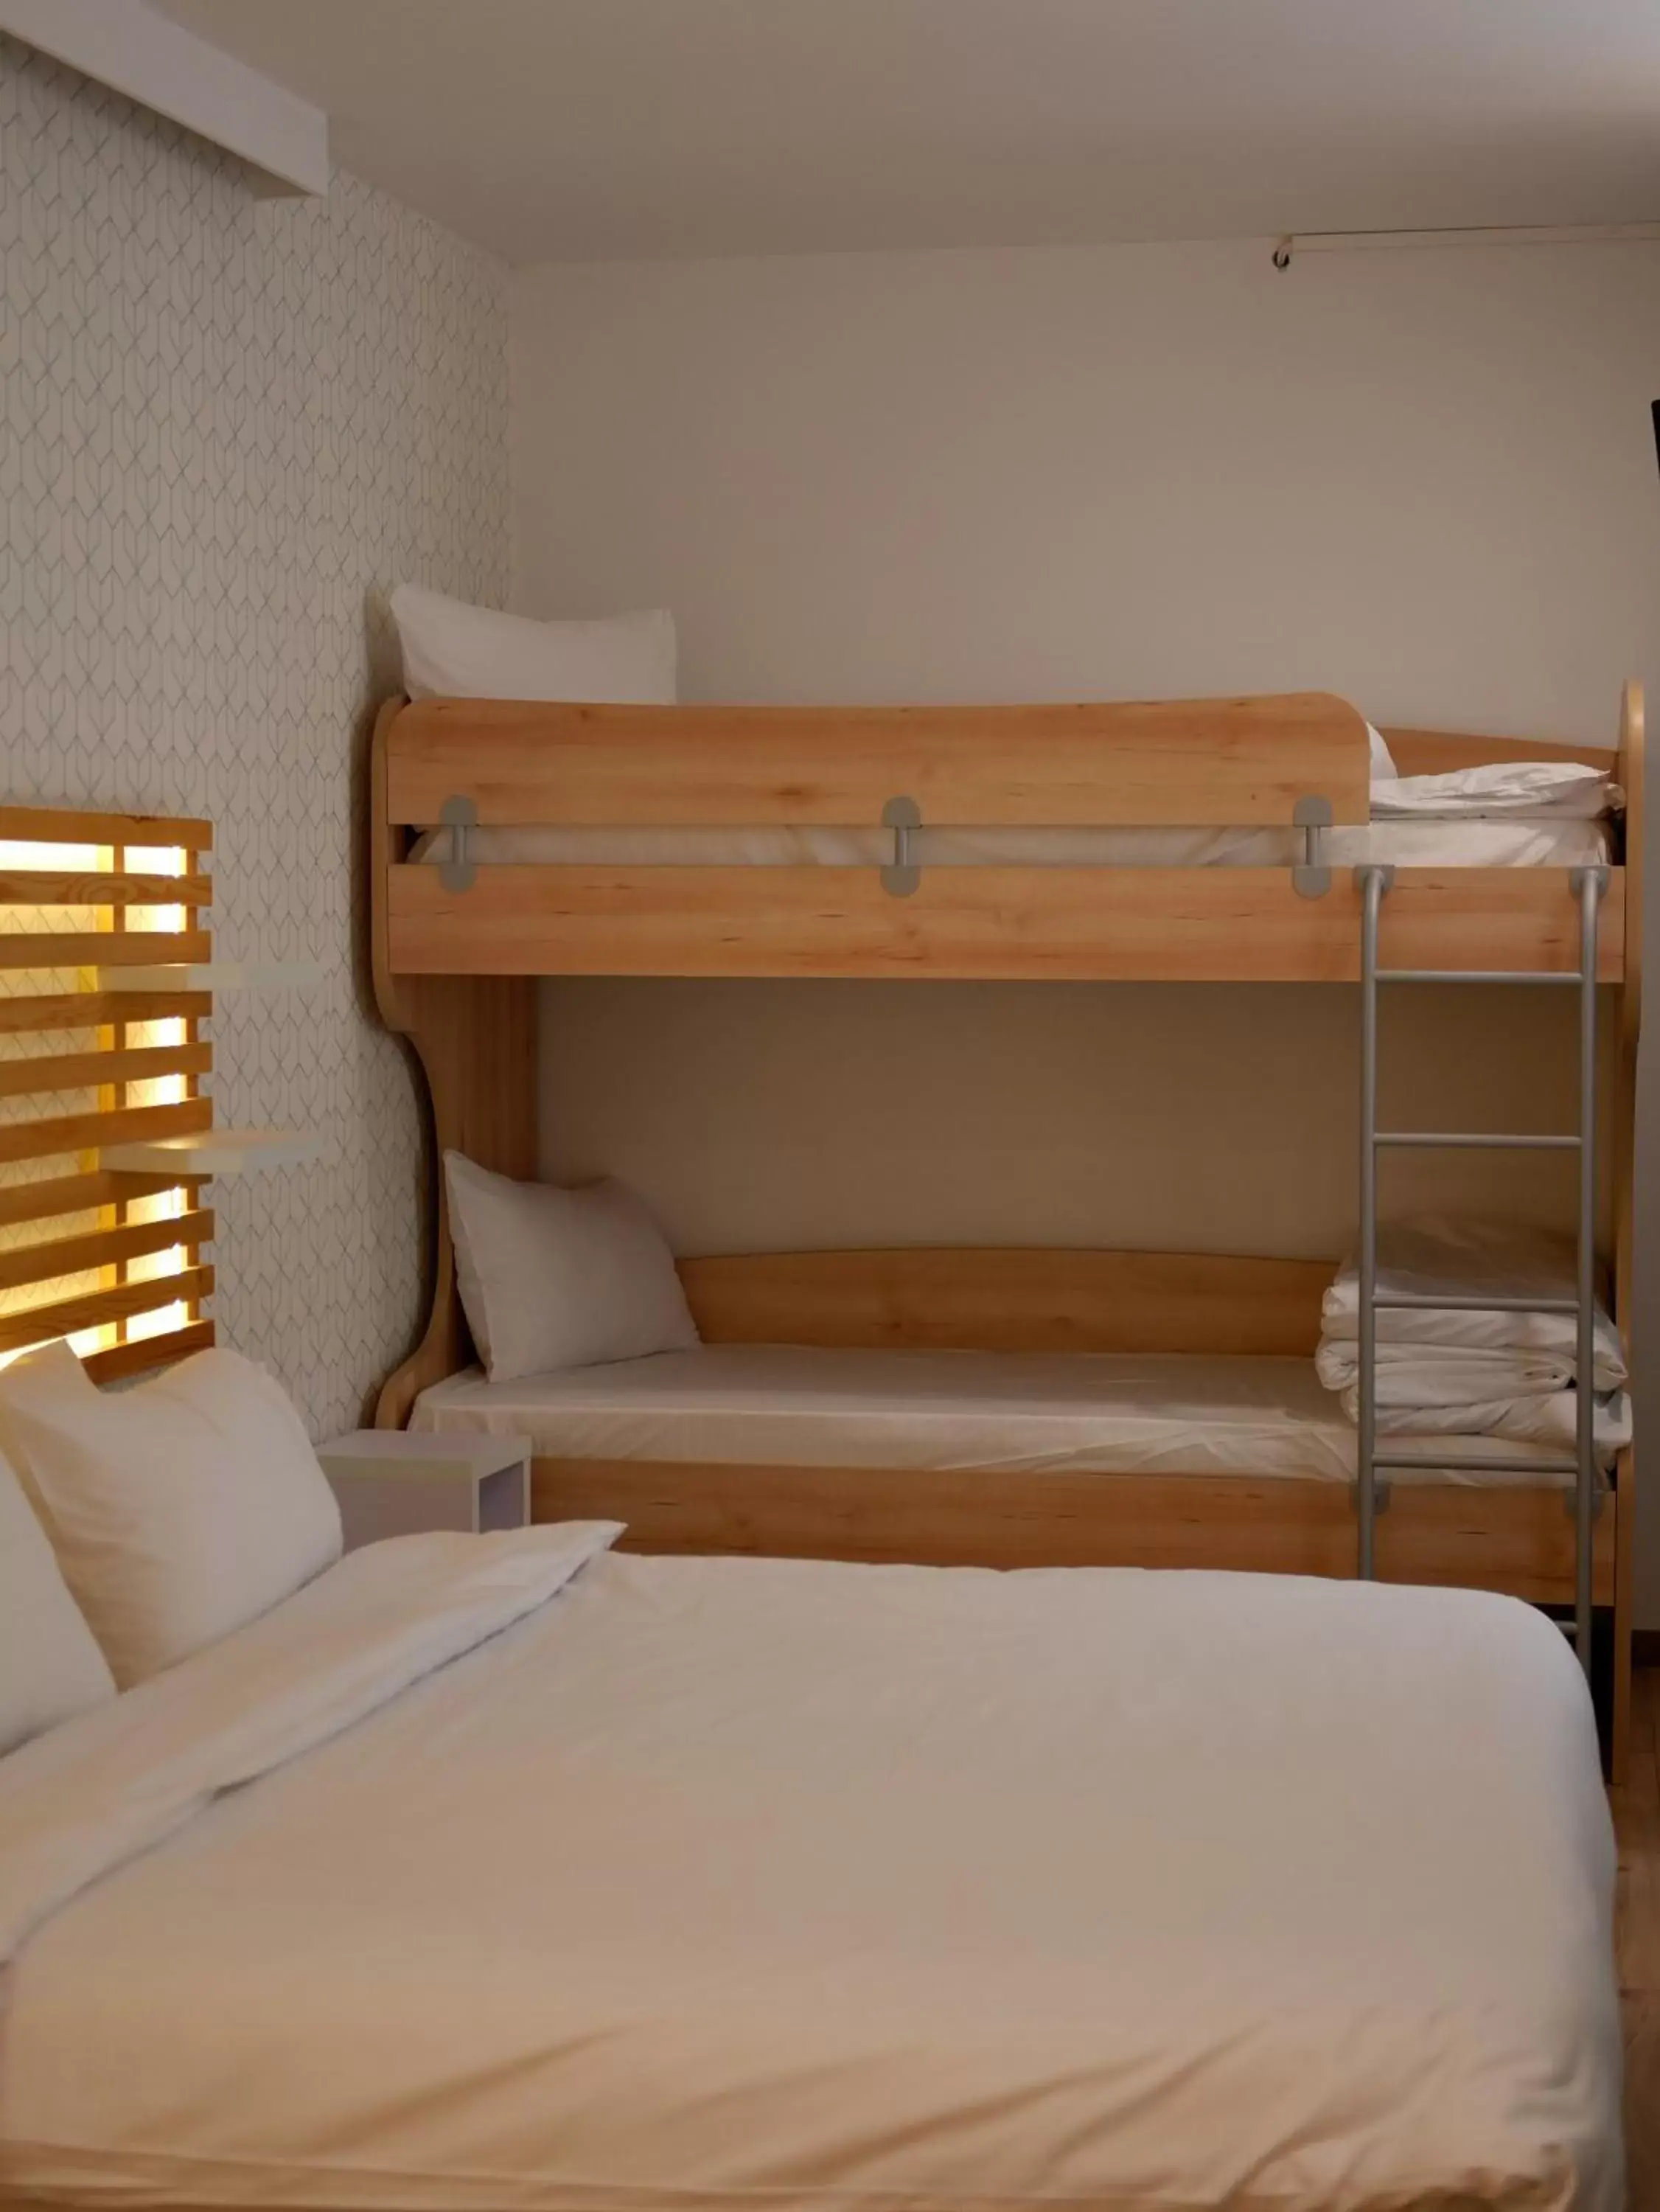 Bunk Bed in Athenian Montaza Hotel